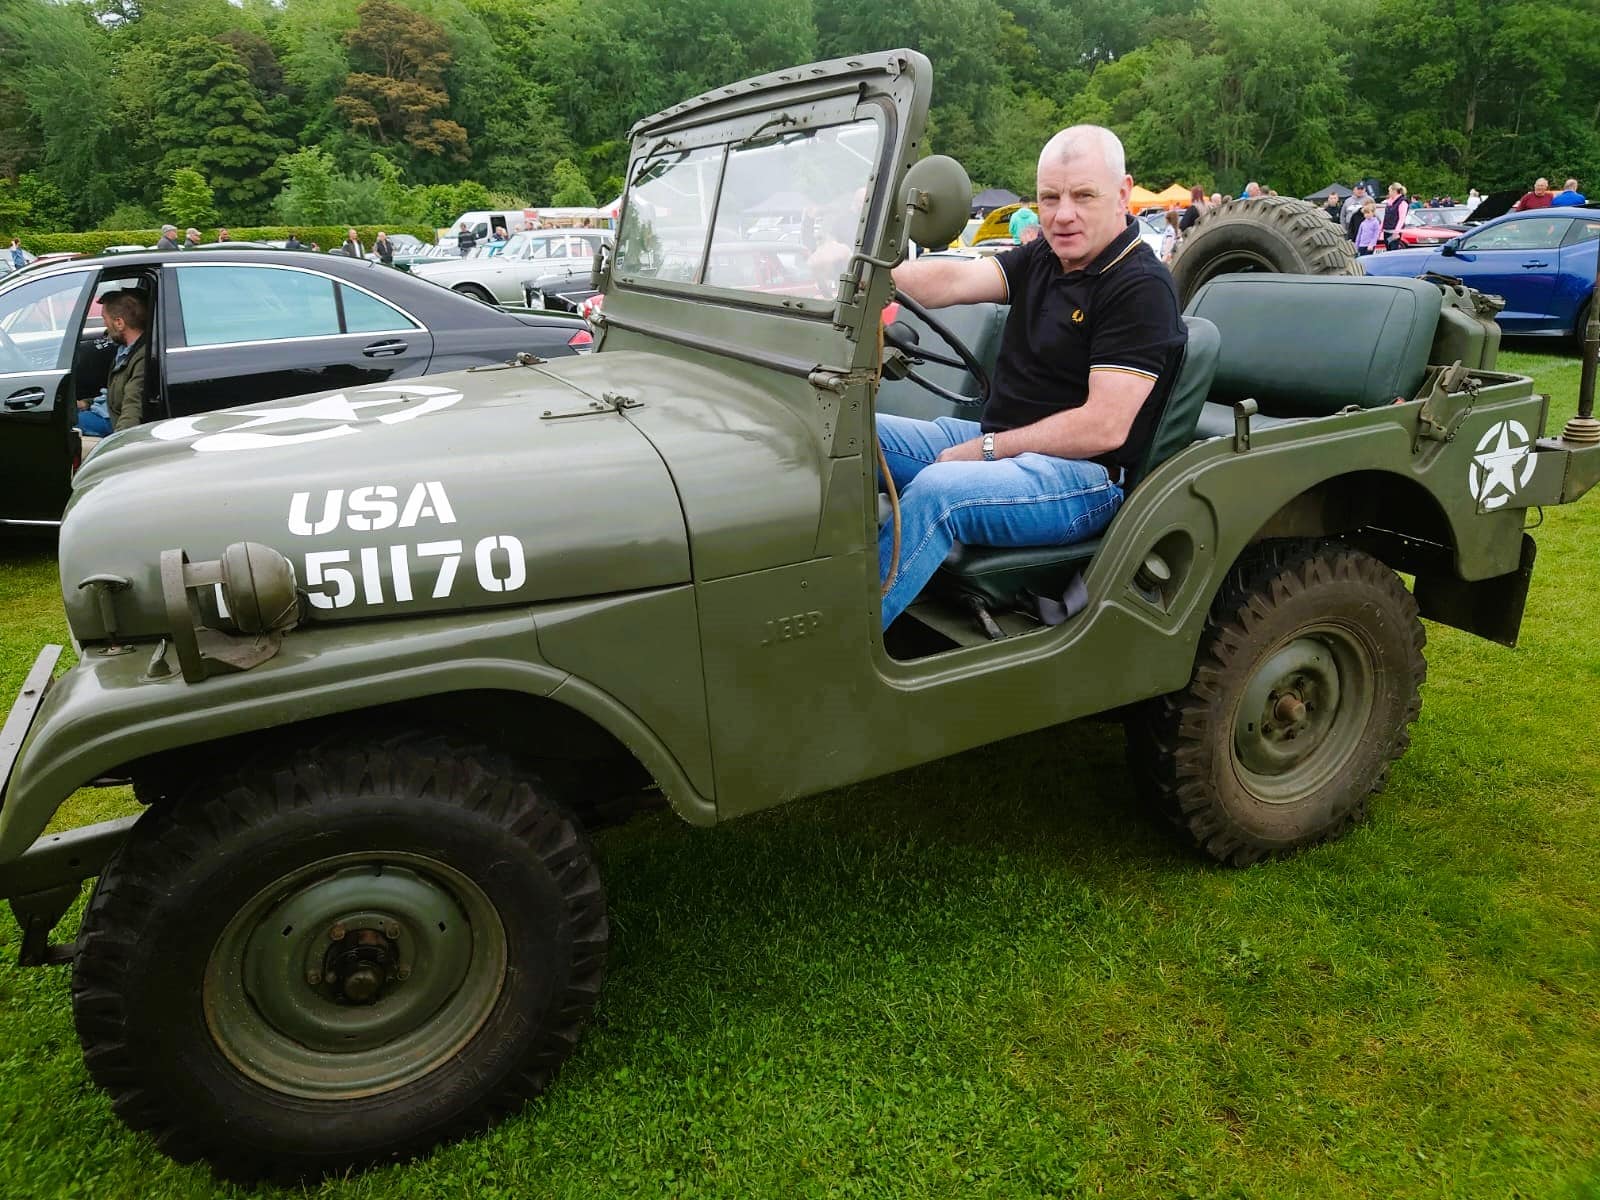 Paddy O'Kane is his 1960 United States Army jeep